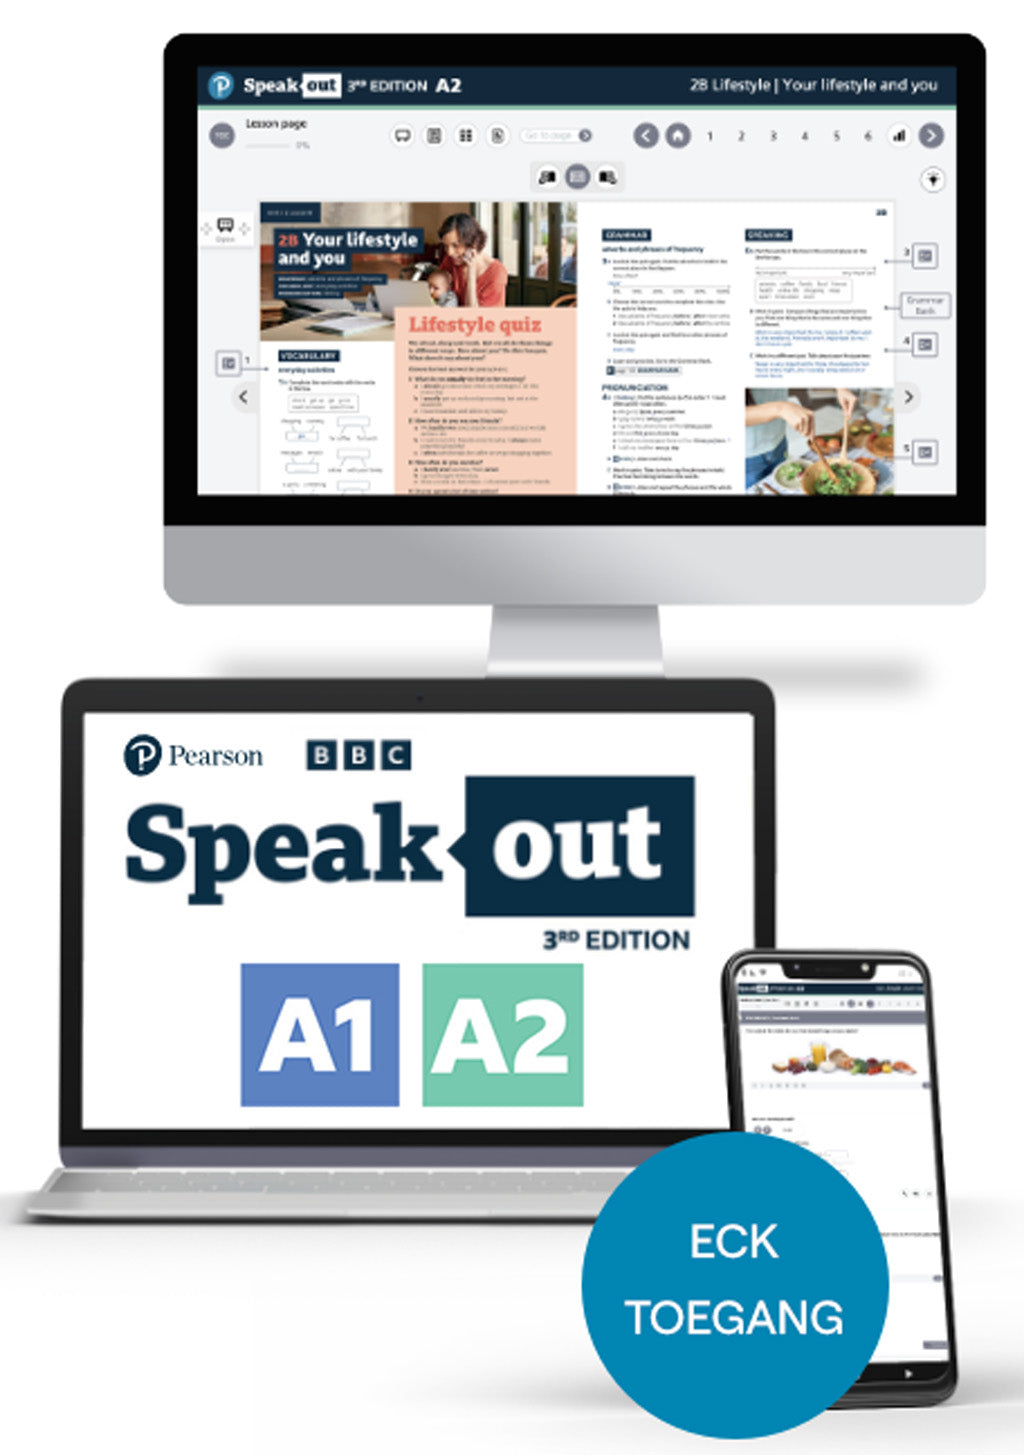 Speakout 3rd edition - A1, A2 Multi-level licence, ebook + online practice 1 year licence (ECK-toegang)